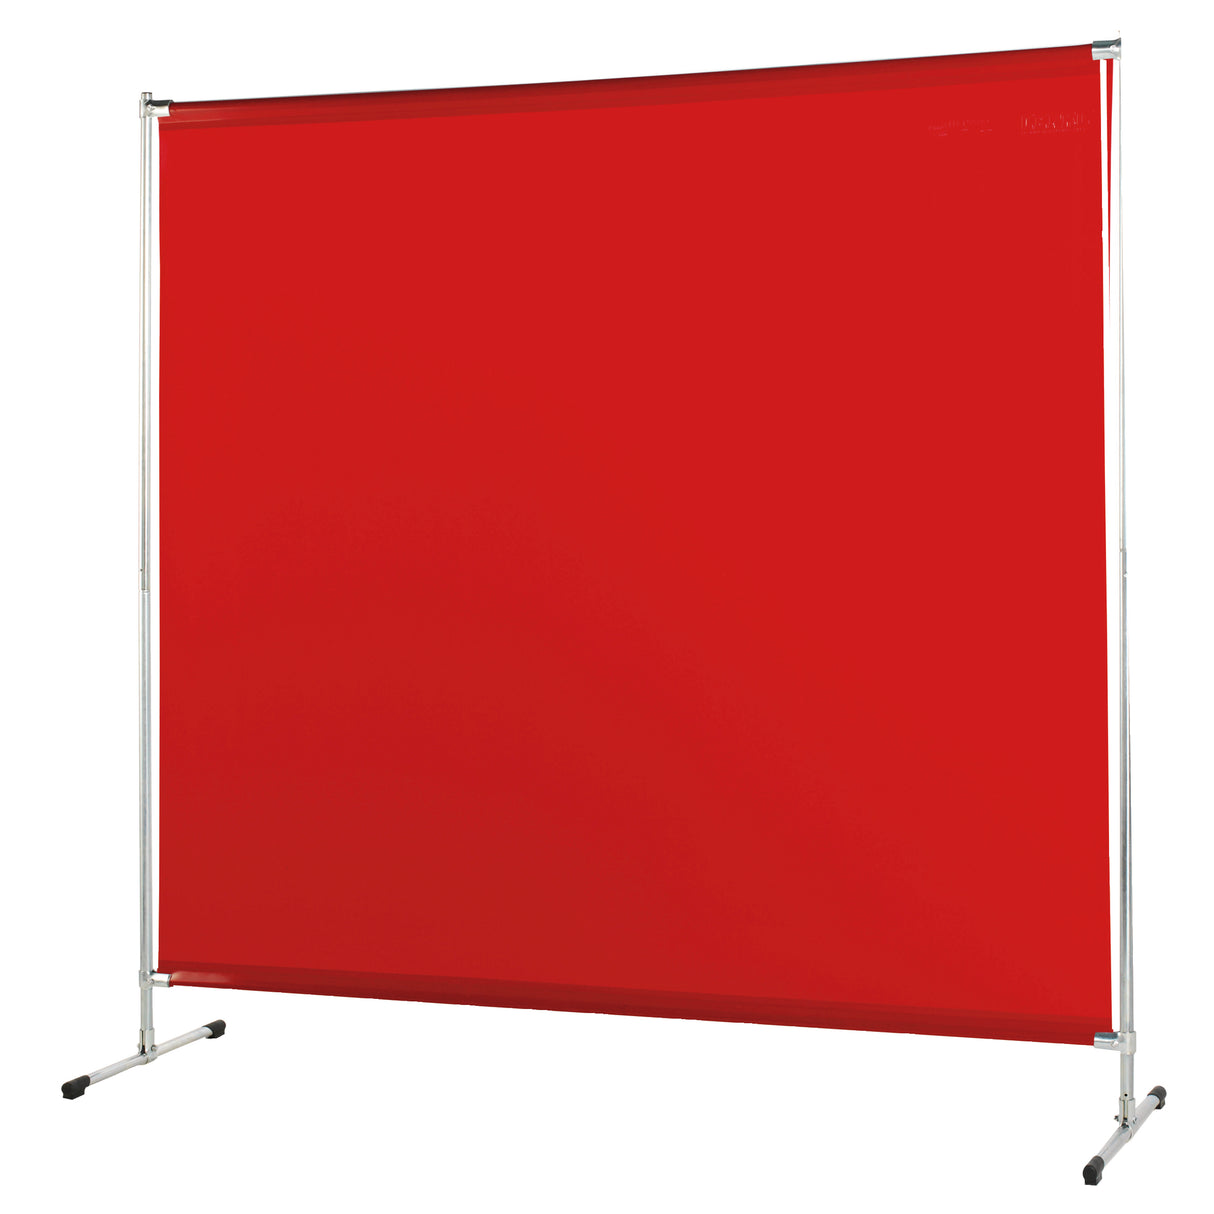 WELDING CURTAIN AND FRAME